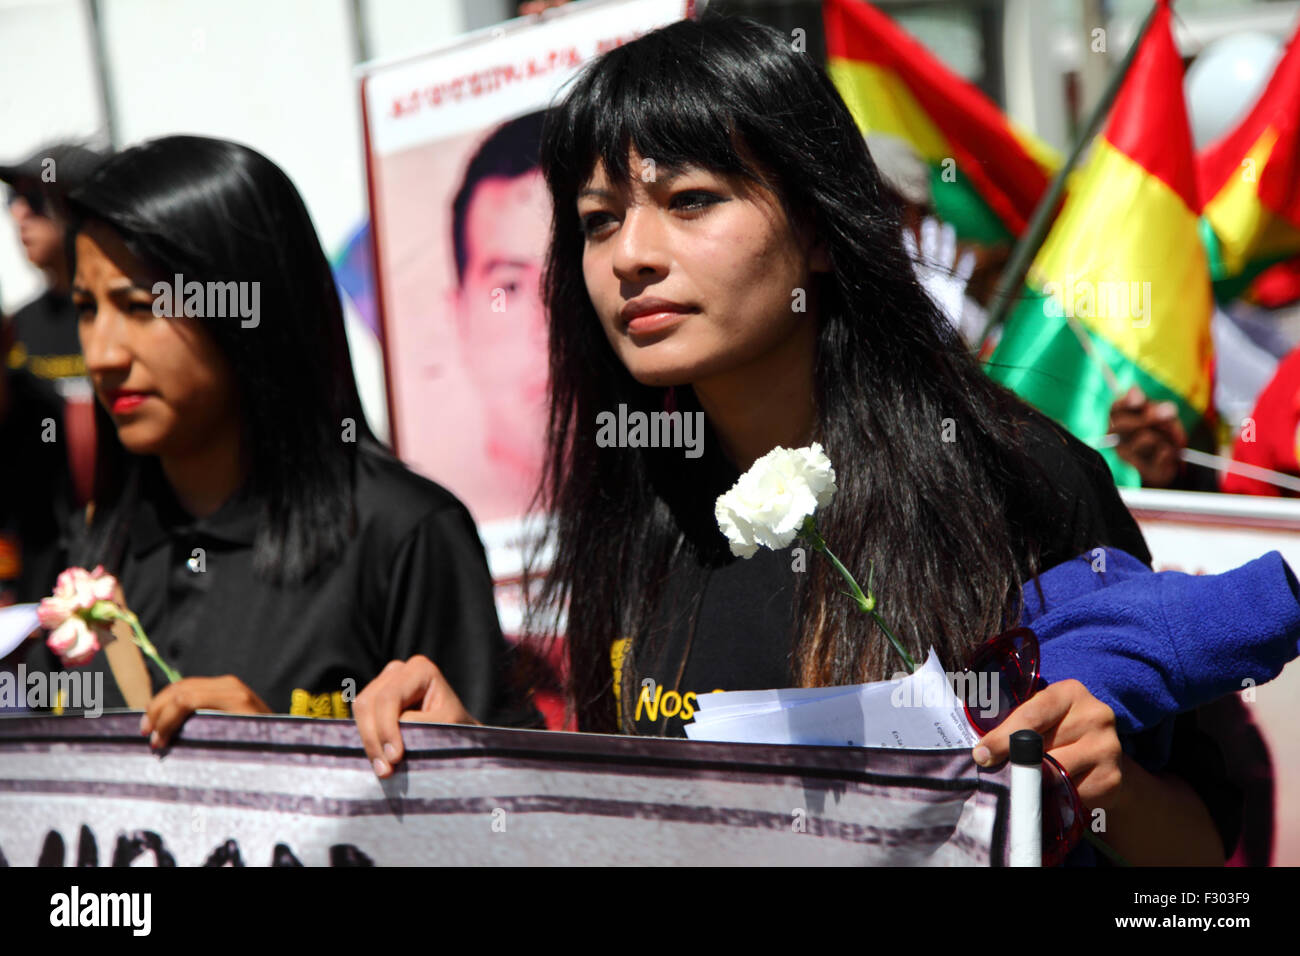 La Paz, Bolivia, 26th September 2015. Evaliz Morales (left, daughter of  Bolivian president Evo Morales) leads a march to the Mexican Embassy in La  Paz to commemorate the first anniversary of the